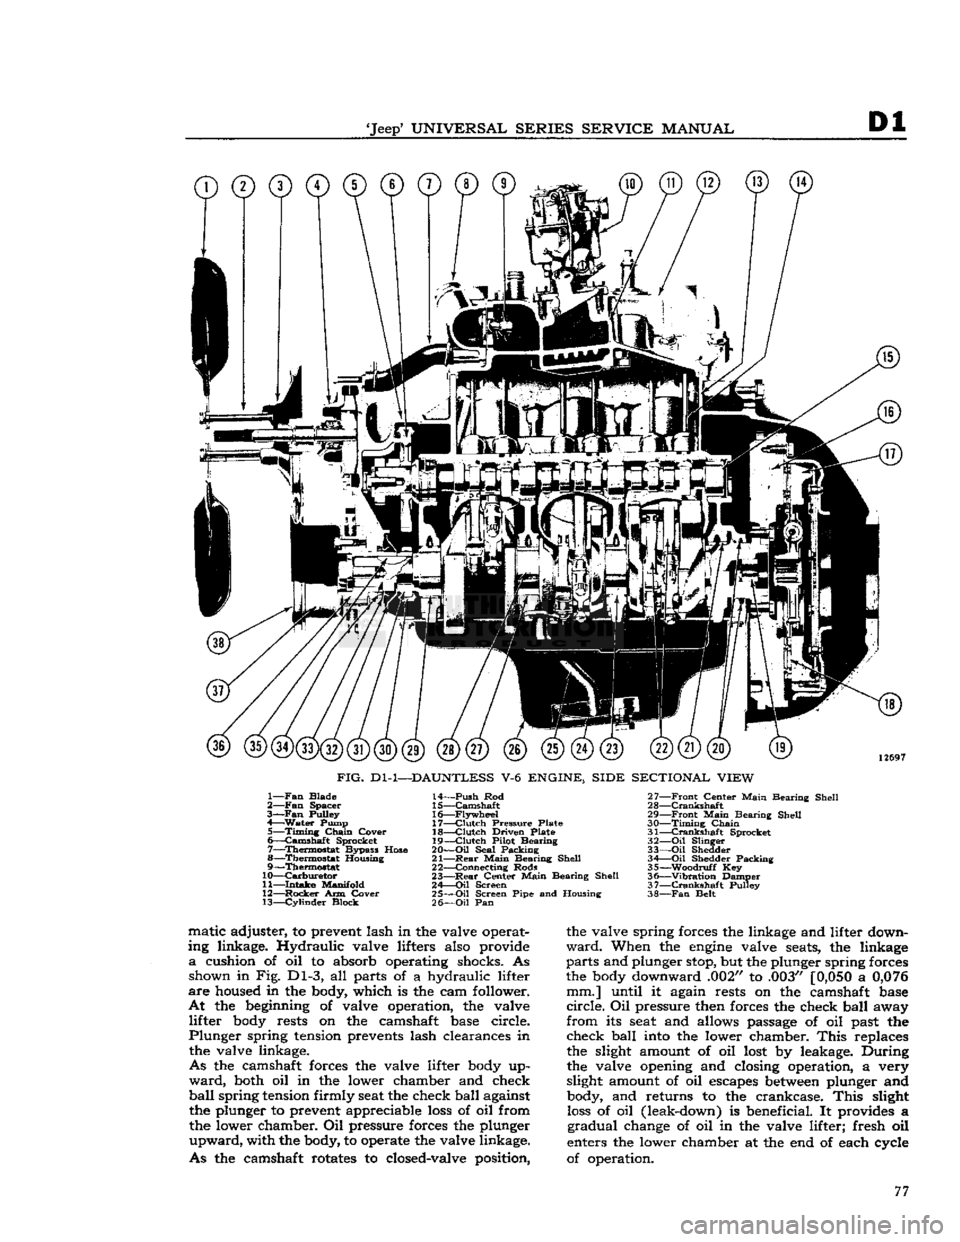 JEEP DJ 1953  Service Manual 
Jeep
 UNIVERSAL SERIES SERVICE
 MANUAL 

Dl 

©©©©©©©©© 

12697 

FIG.
 Dl-1—DAUNTLESS
 V-6
 ENGINE, SIDE SECTIONAL VIEW 

1—
 Fan
 Blade 
2—
 Fan
 Spacer 

3—Fan
 Pulley 
4—
 Wa